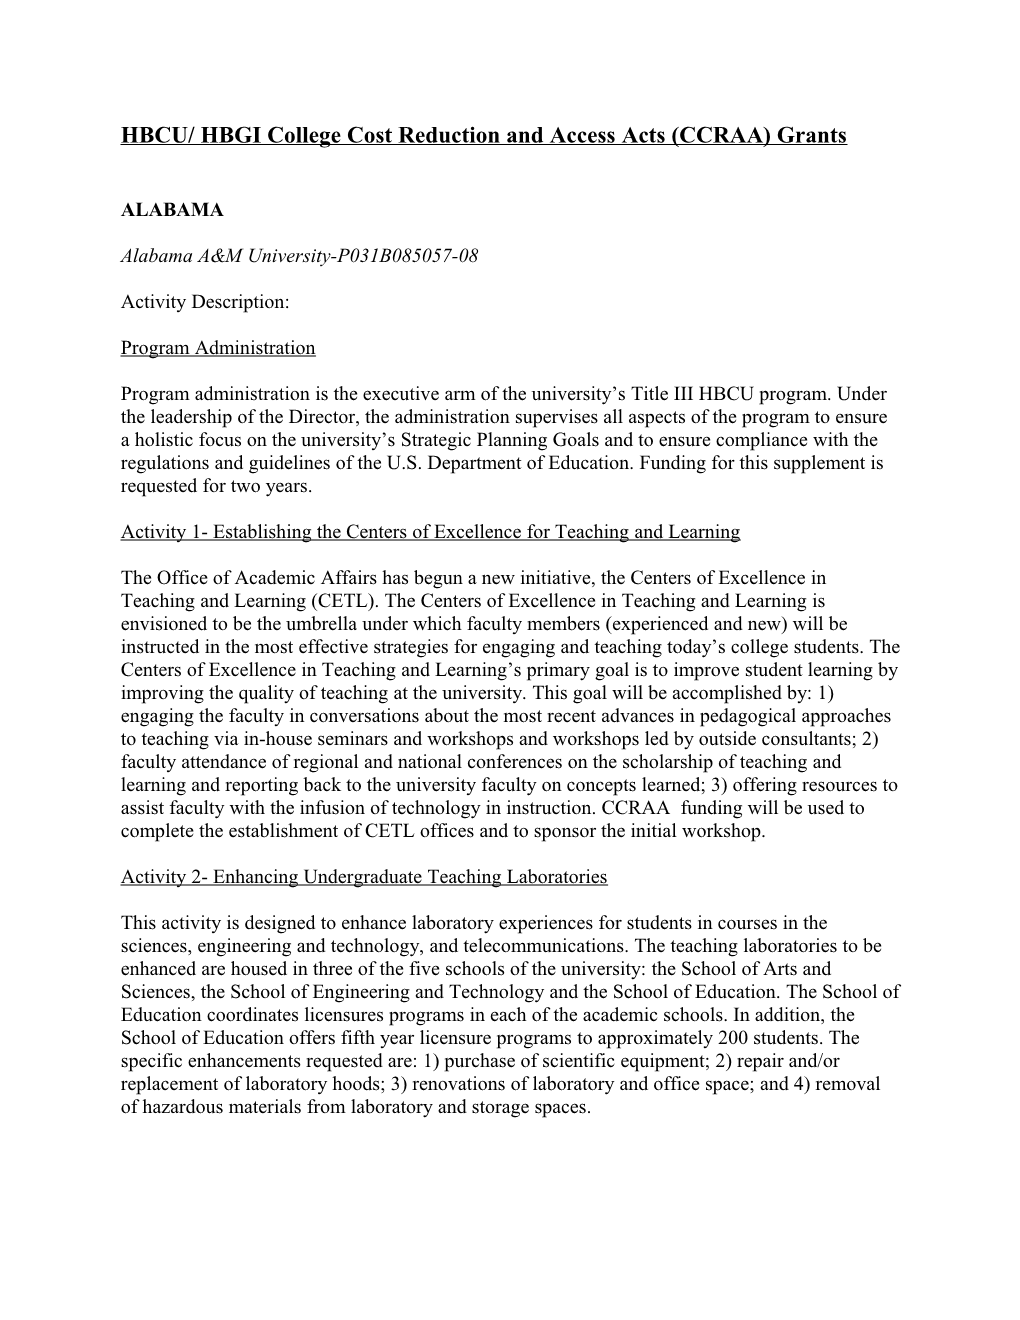 HBCU/ HBGI College Cost Reduction and Access Acts (CCRAA) FY 2008 Abstracts (MS Word)